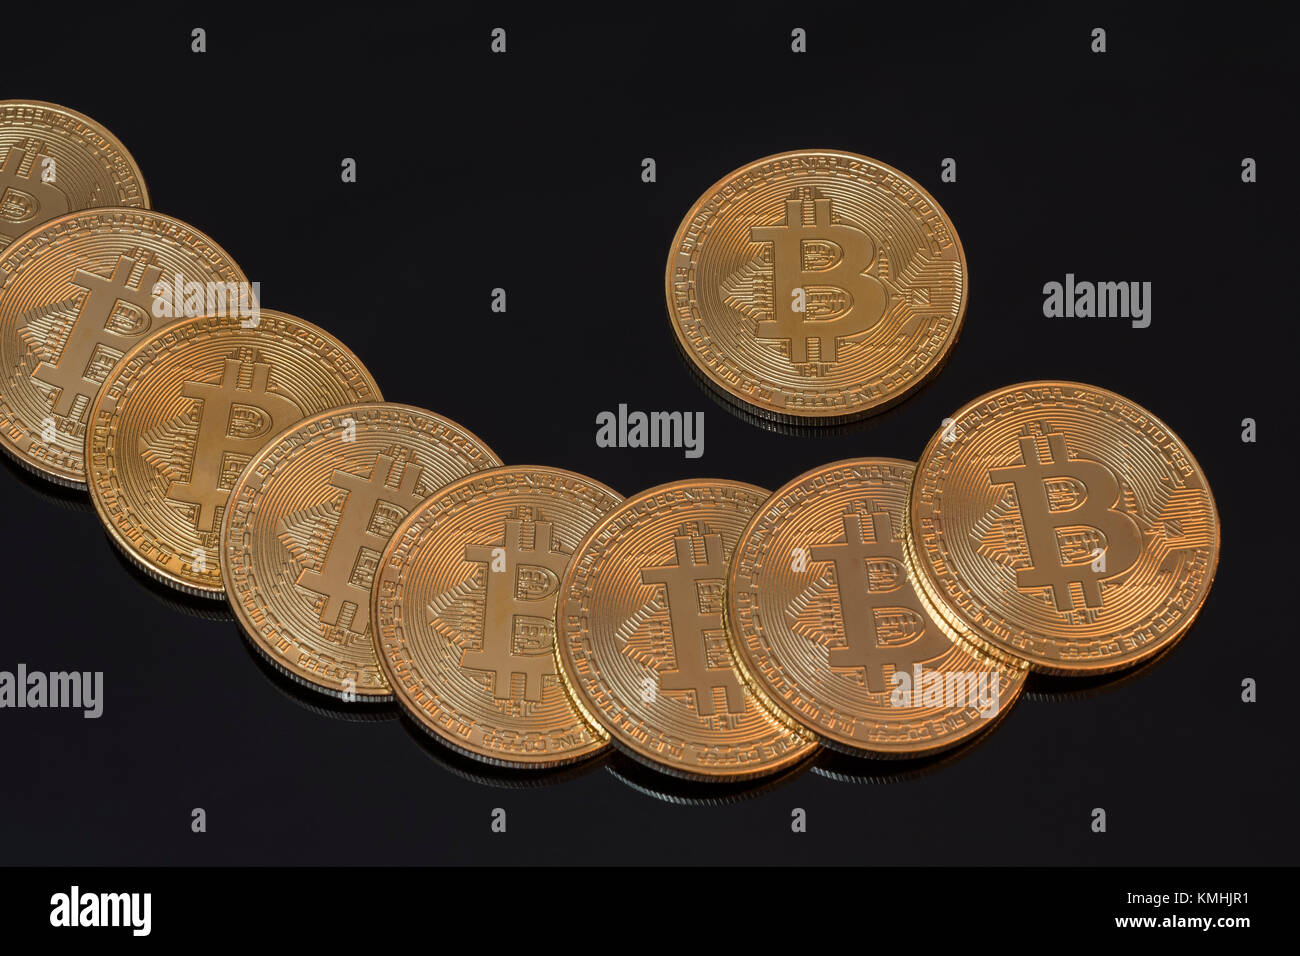 Gold colored Bitcoins - the peer-to-peer payment cryptocurrency reaching high levels in December 2017. Stock Photo